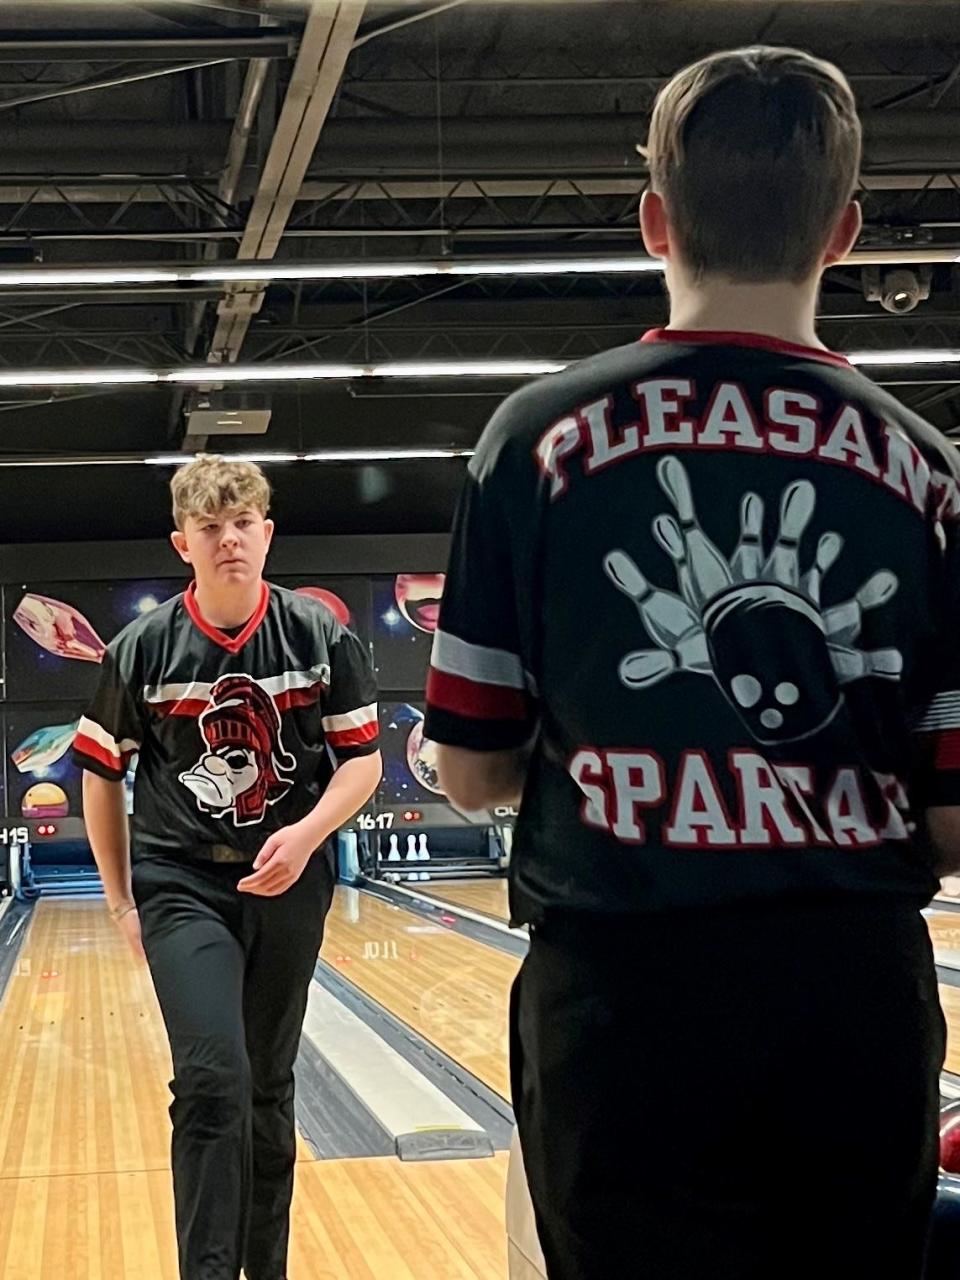 Pleasant's Dawson Hall walks back after making a shot against River Valley during a boys bowling match at BlueFusion Entertainment last week.